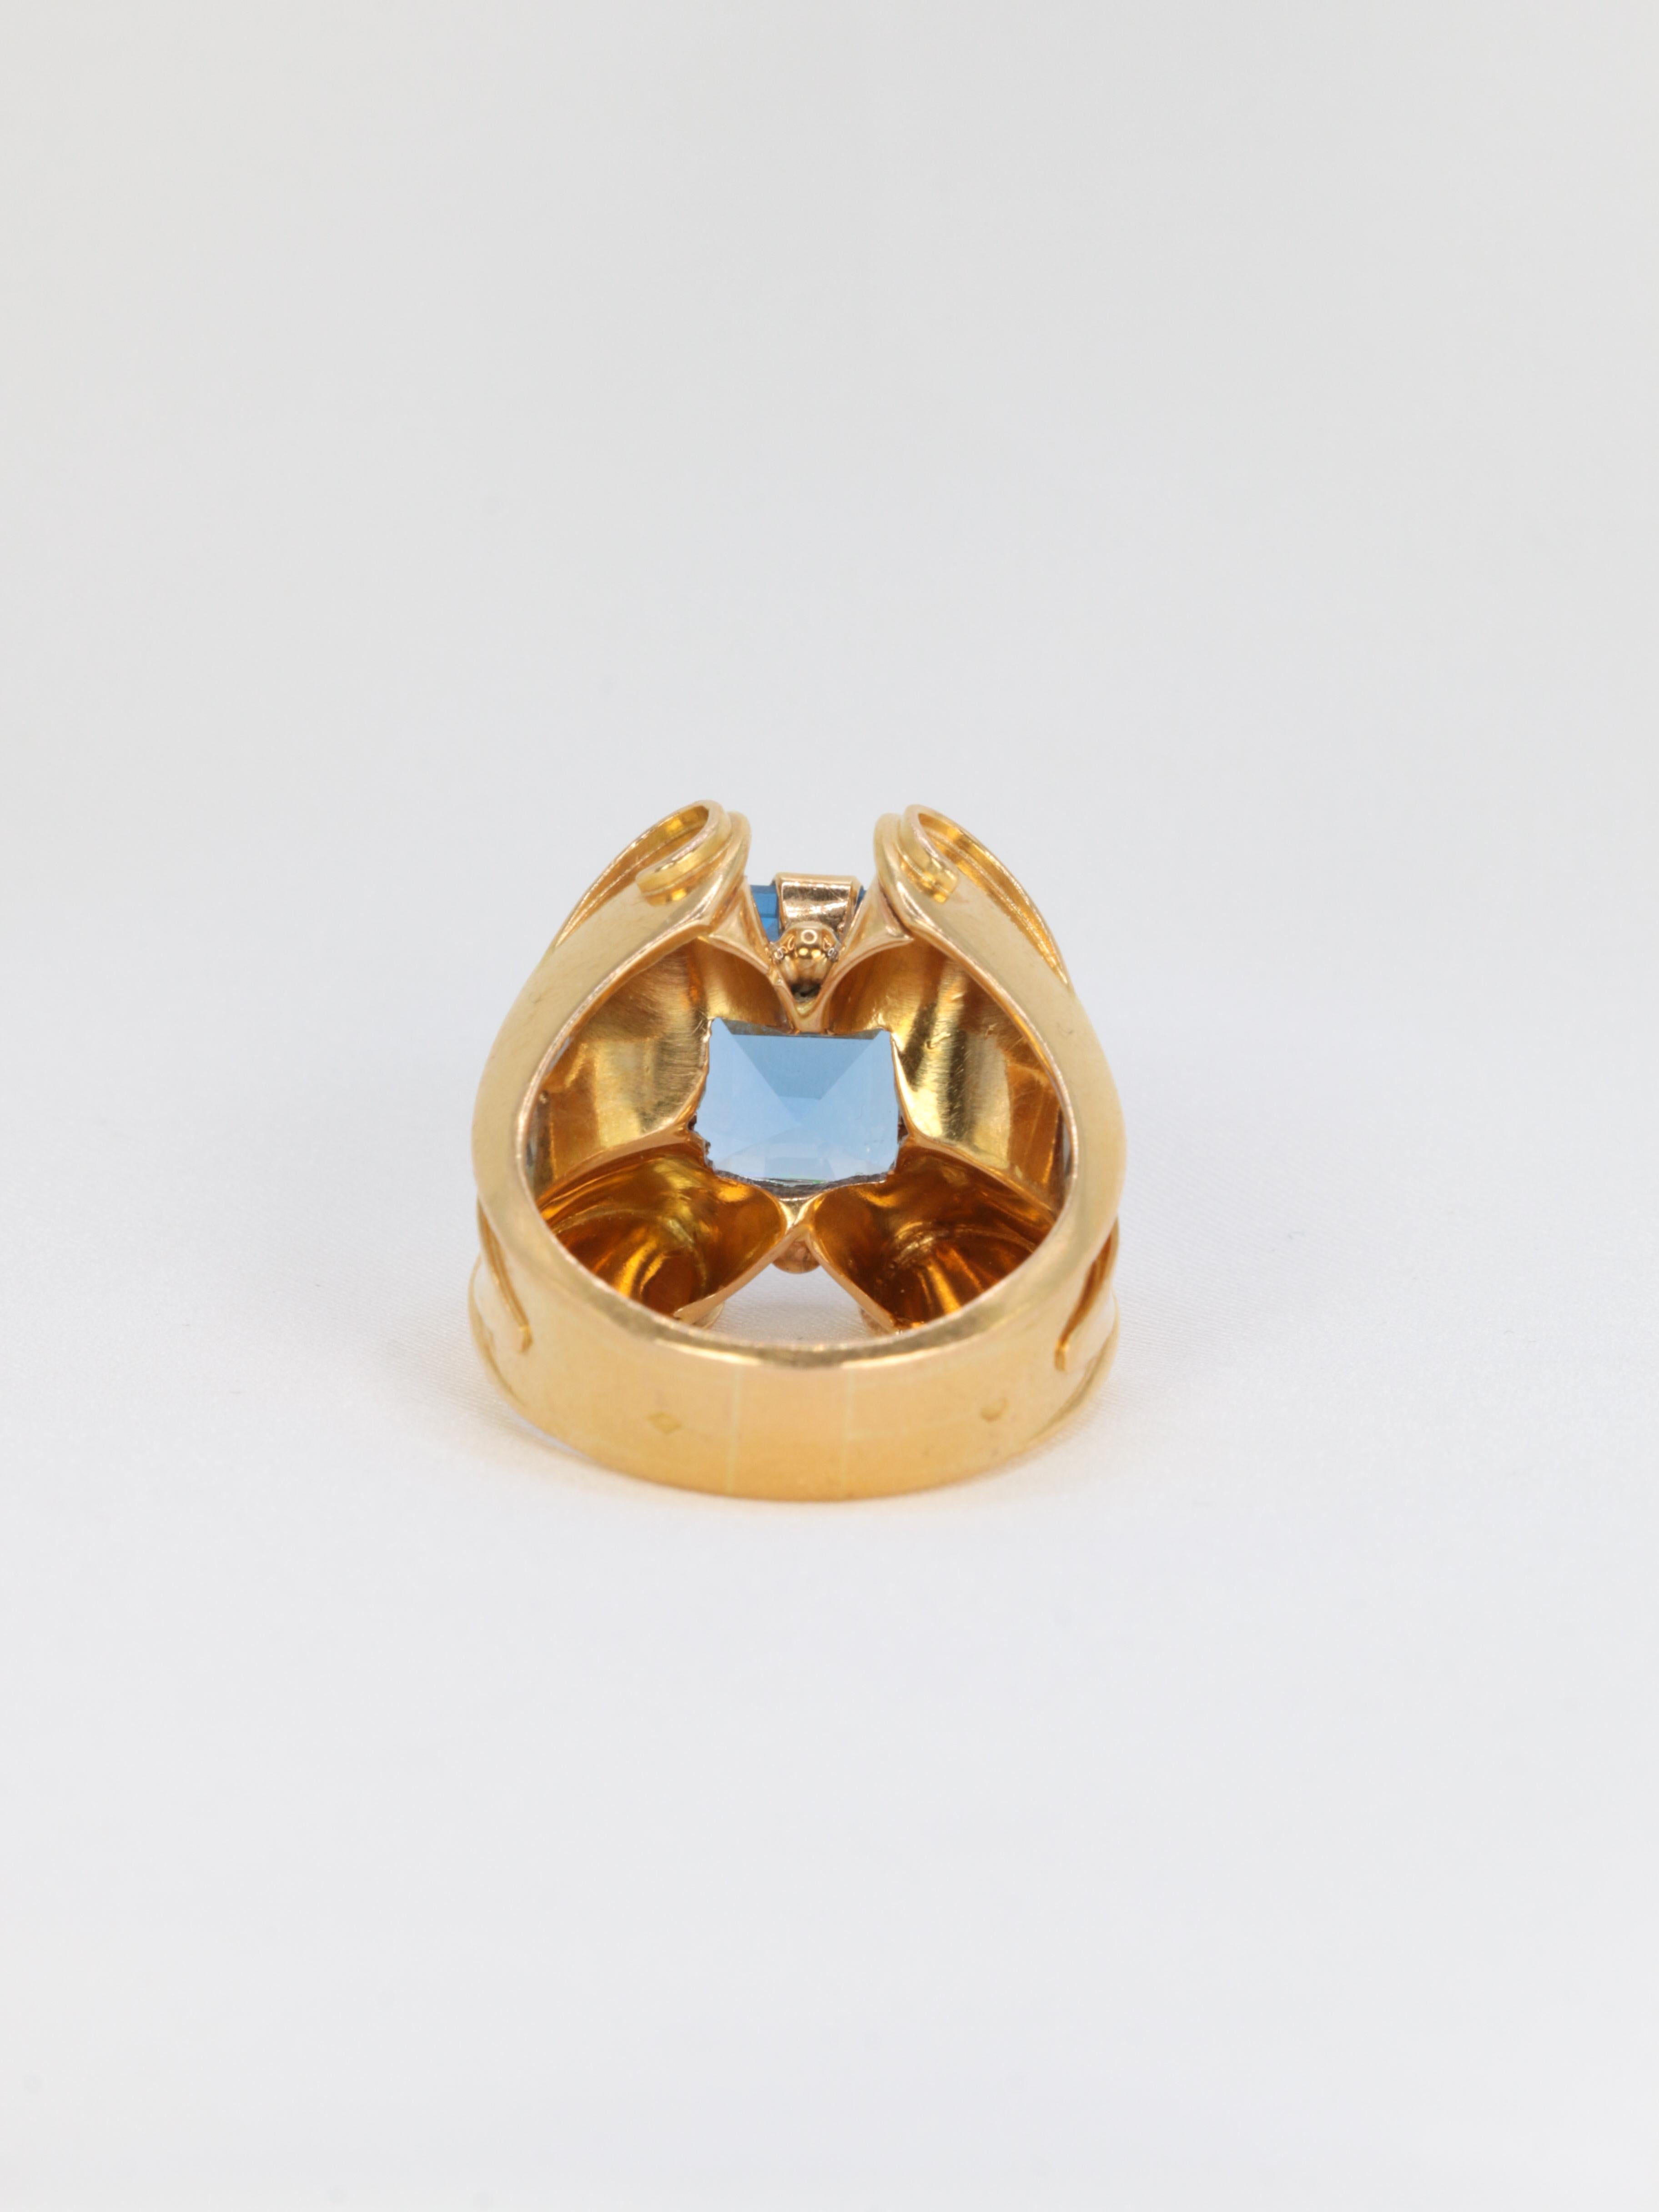 Emerald Cut Gold Vintage Cocktail Ring Set with a Blue Stone